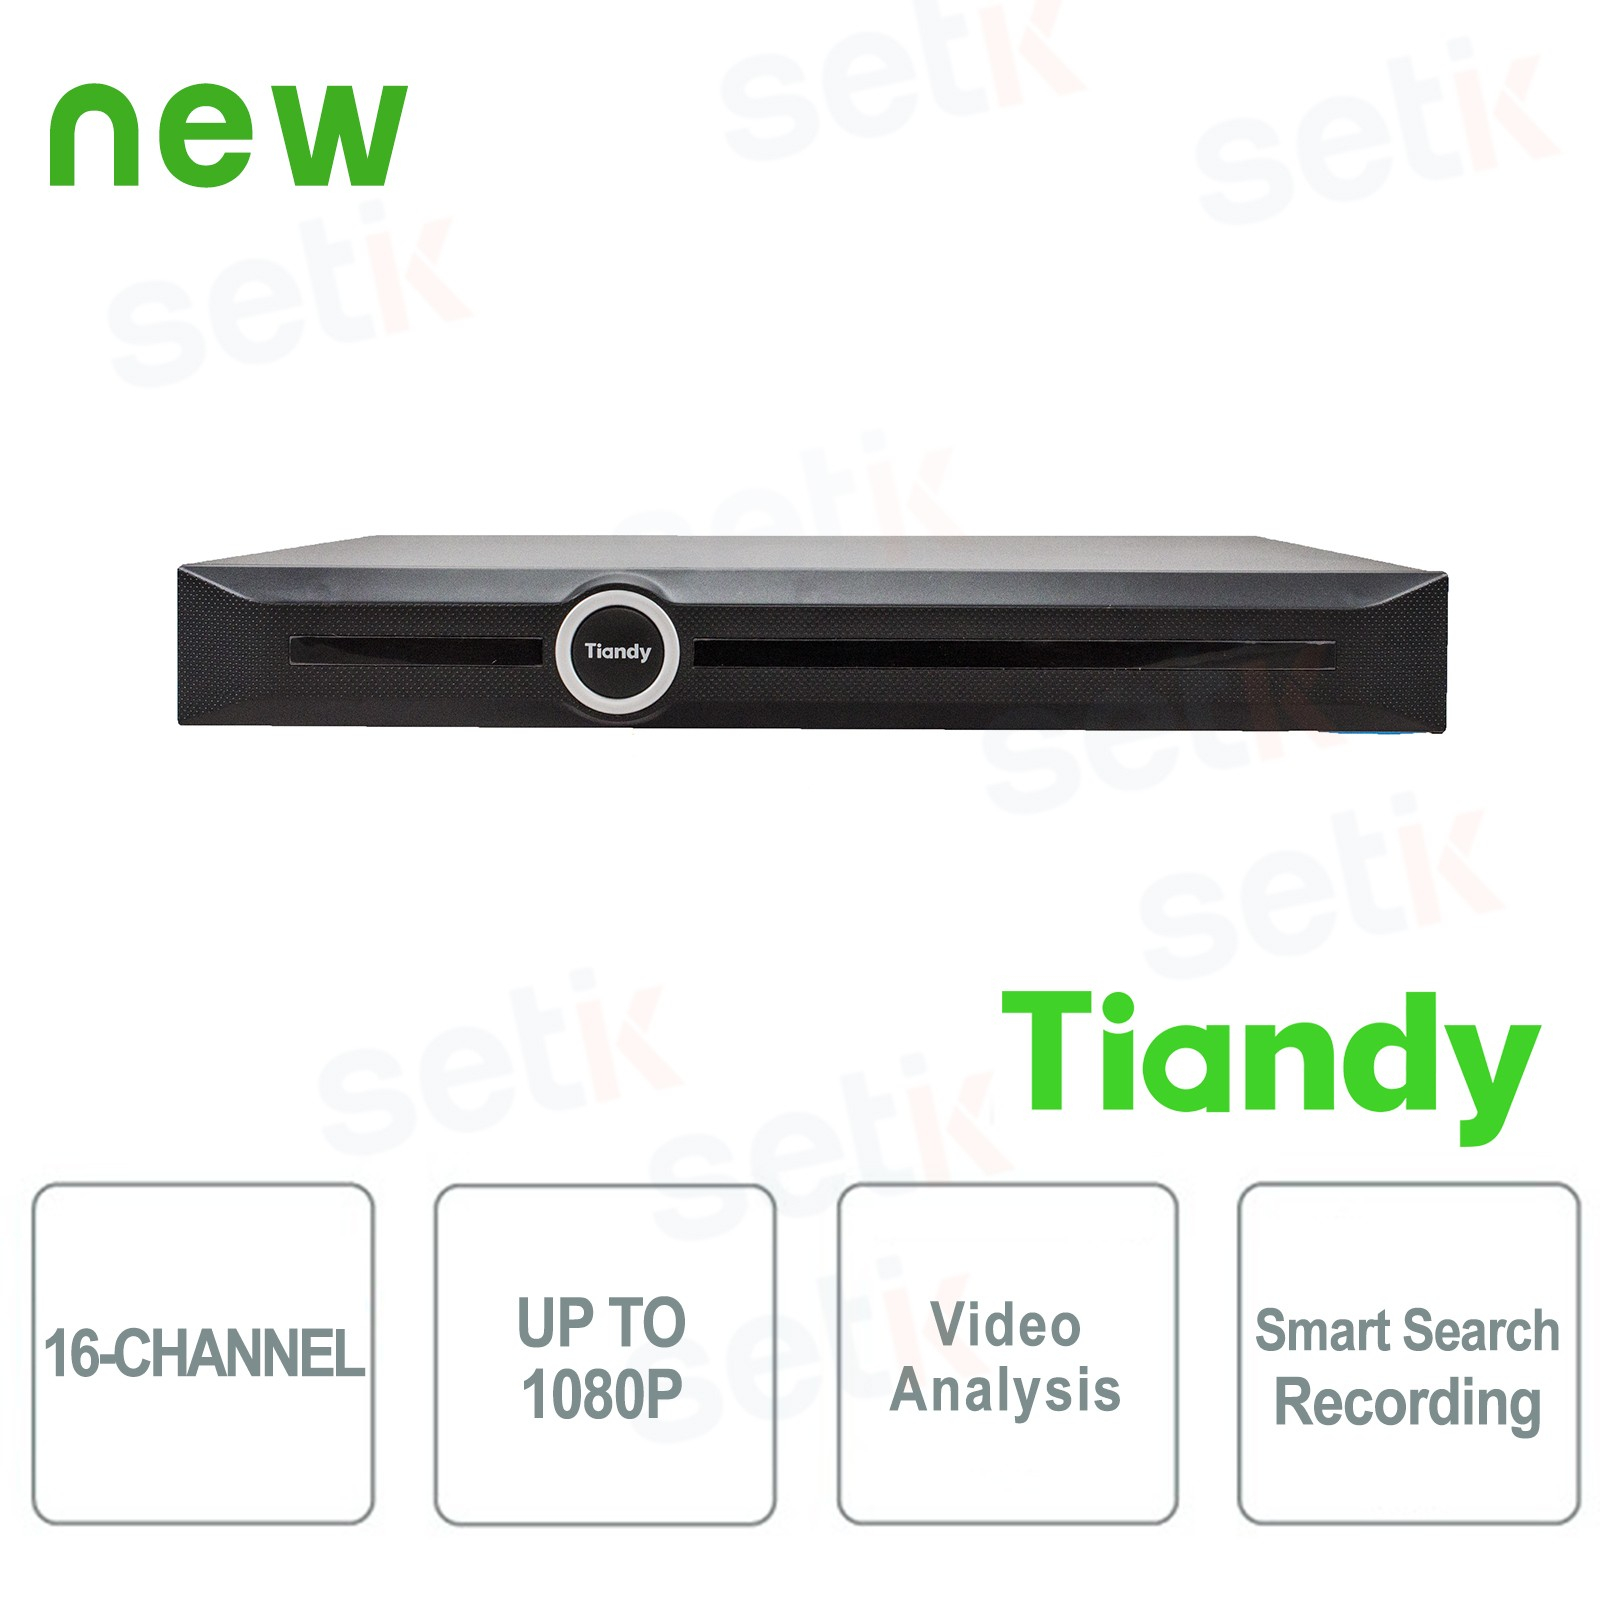 Tiandy NVR 16 canales 1080P 2HDD Video Análisis y Smart Search /& Recording TC-NR4016M7-S2 Tiandy